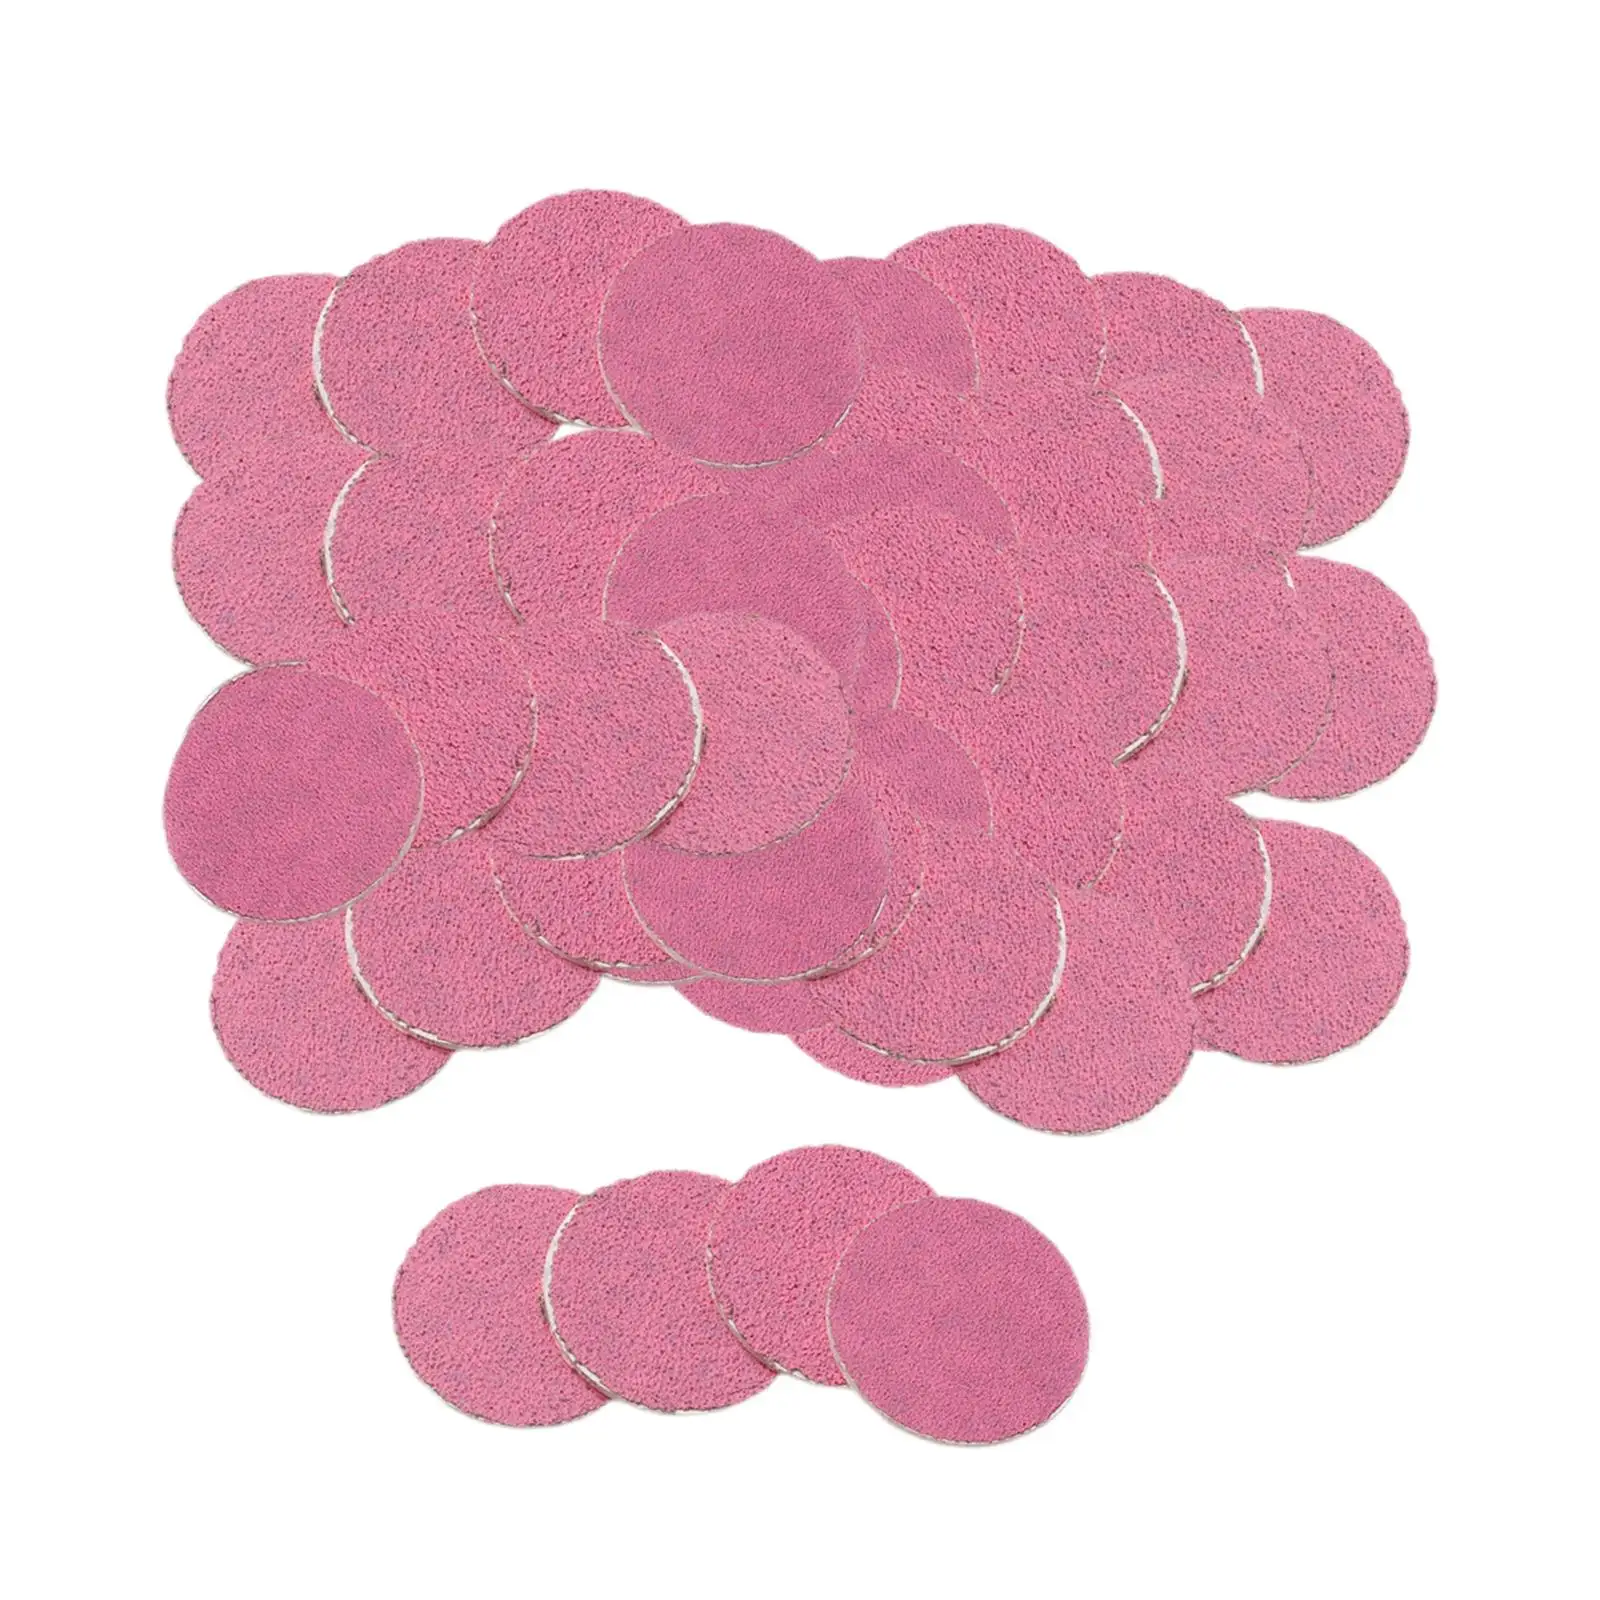 50x Sandpaper Disk Replacement Pad Pink Sandpaper Pad disks Replaceable for Dead Cracked Hard Skin Polishing Craft Women Men